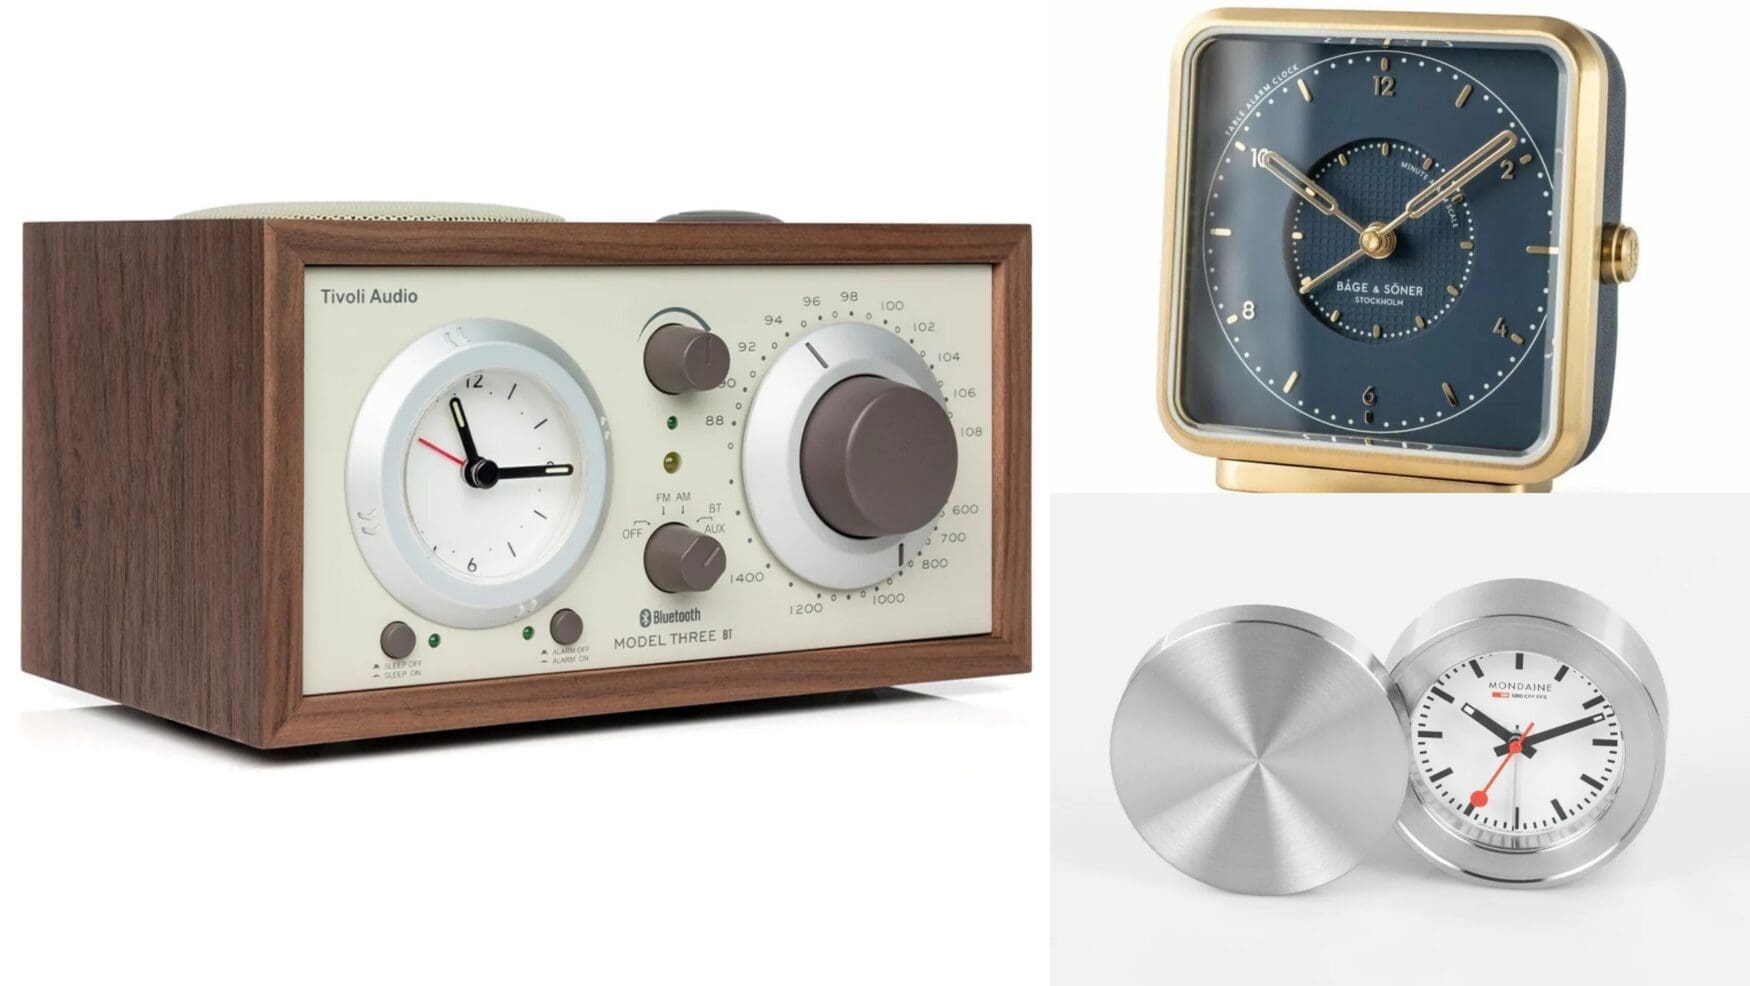 The best part of waking up: 5 awesome alarm clocks for watch collectors